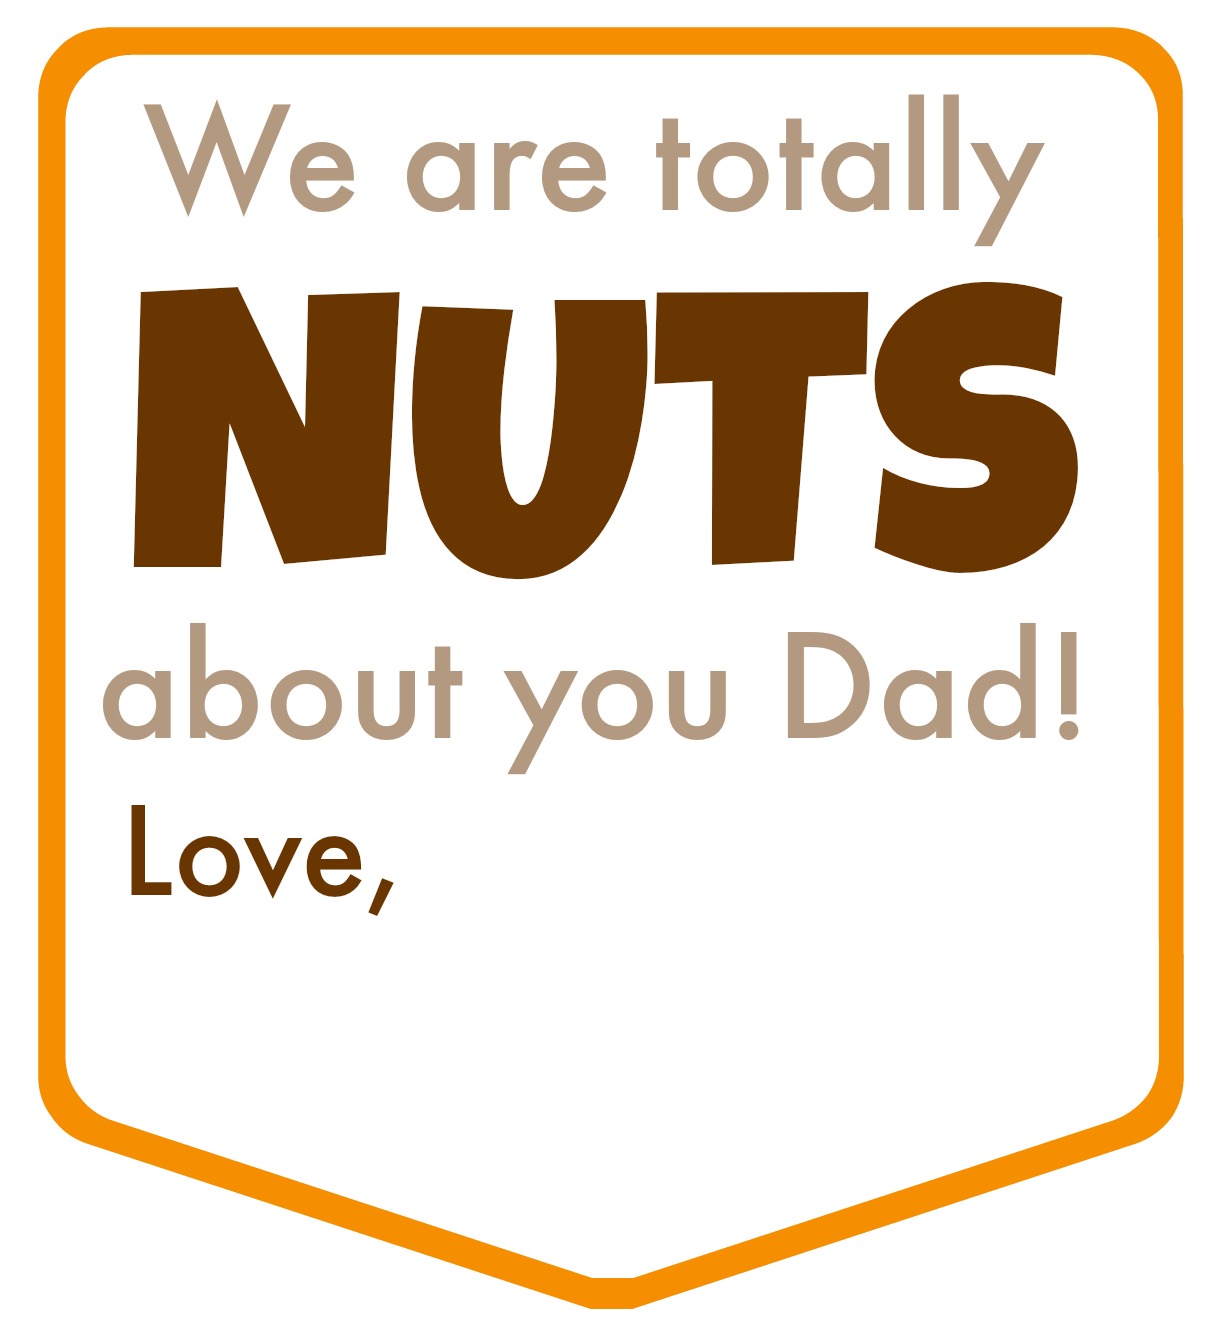 Nuts about you Dad